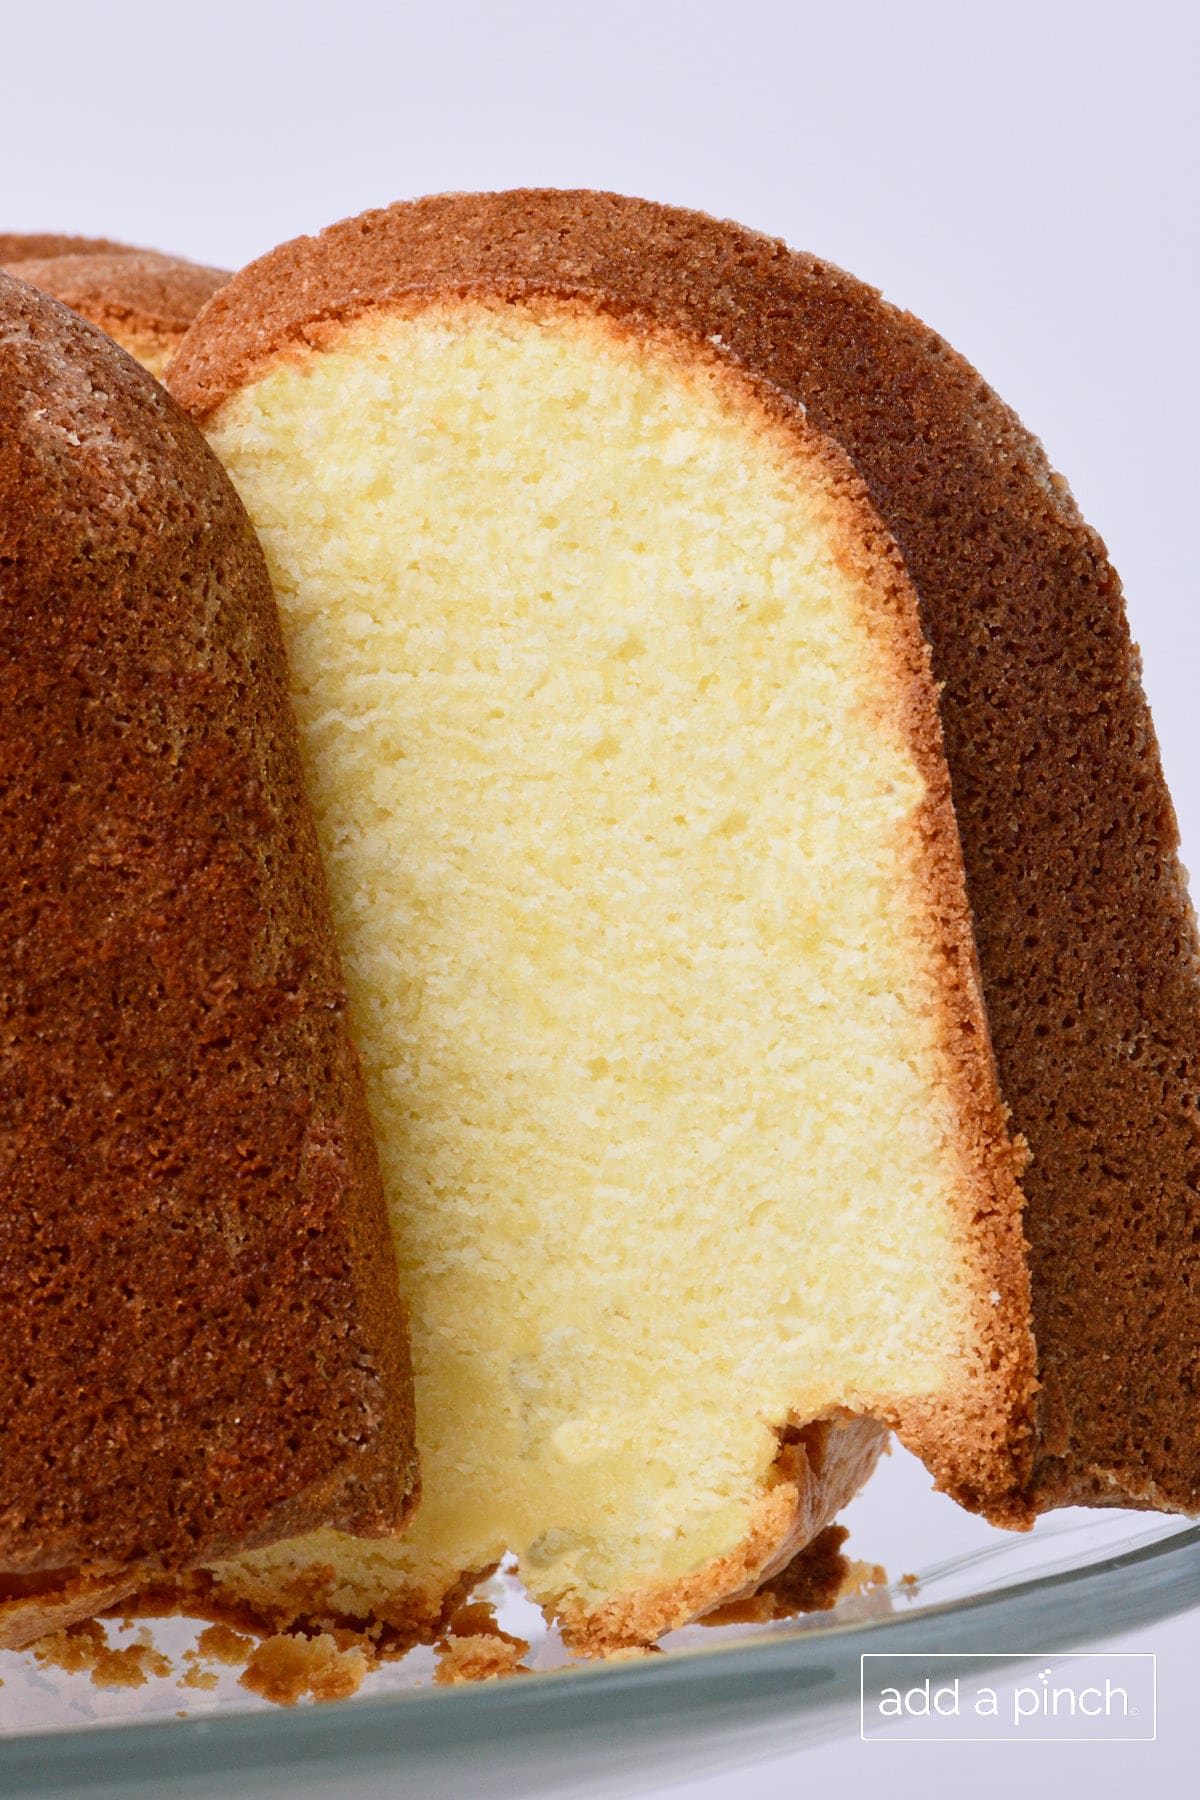 Cream cheese pound cake with slice removed to show velvety inside.  